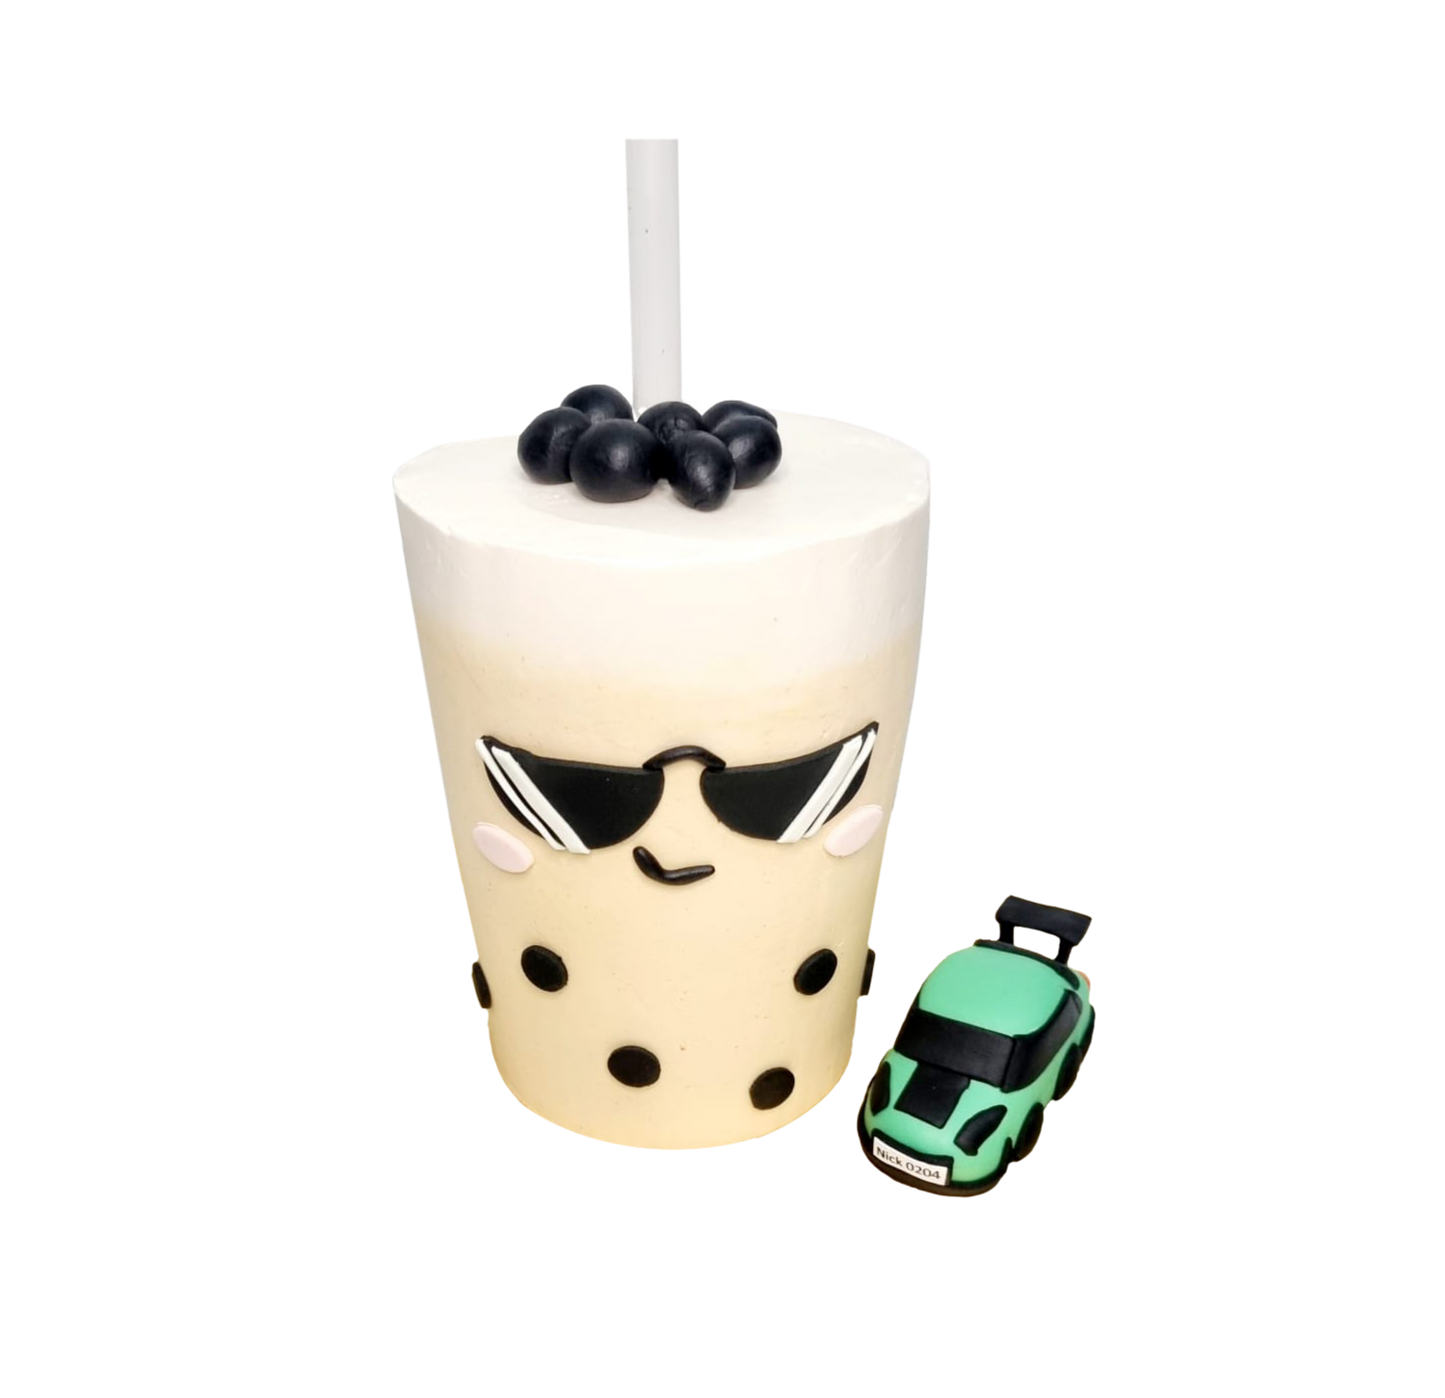 Drinkable Bubble Tea Cake with Green GTR Car